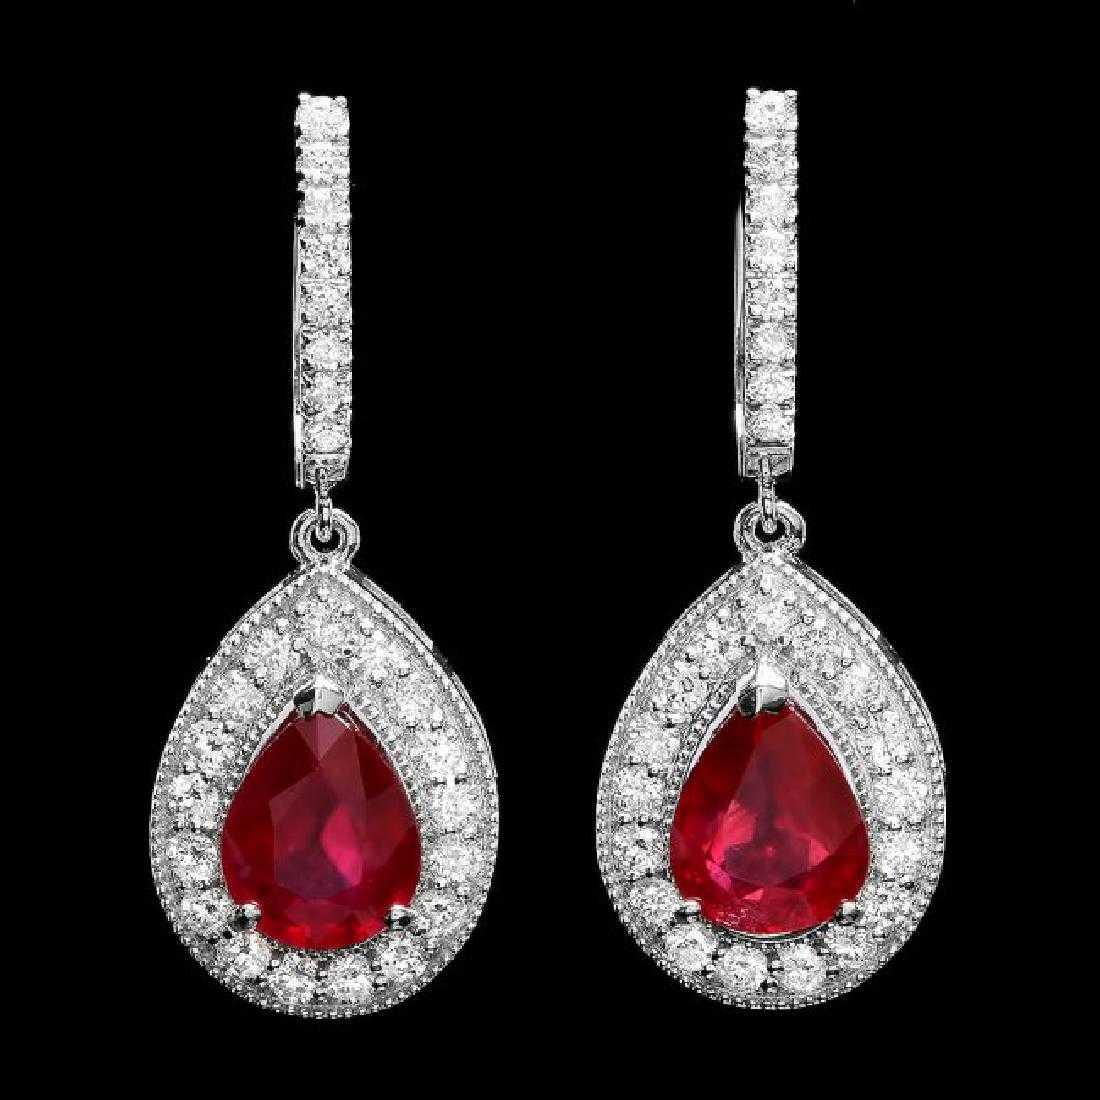 14K White Gold 6.36ct Ruby and 1.38ct Diamond Earrings